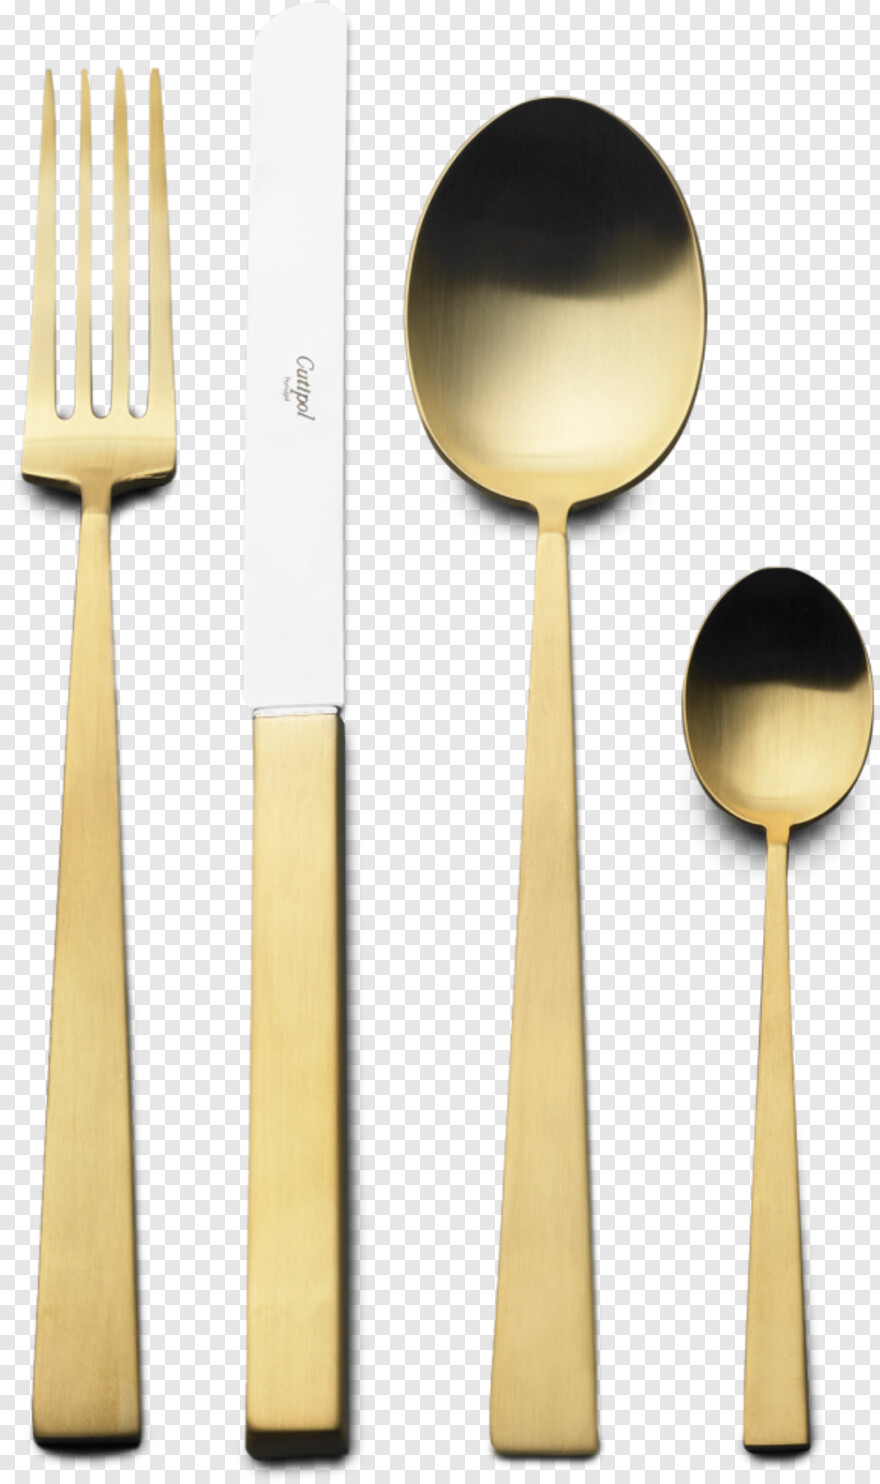 fork-and-spoon # 931830